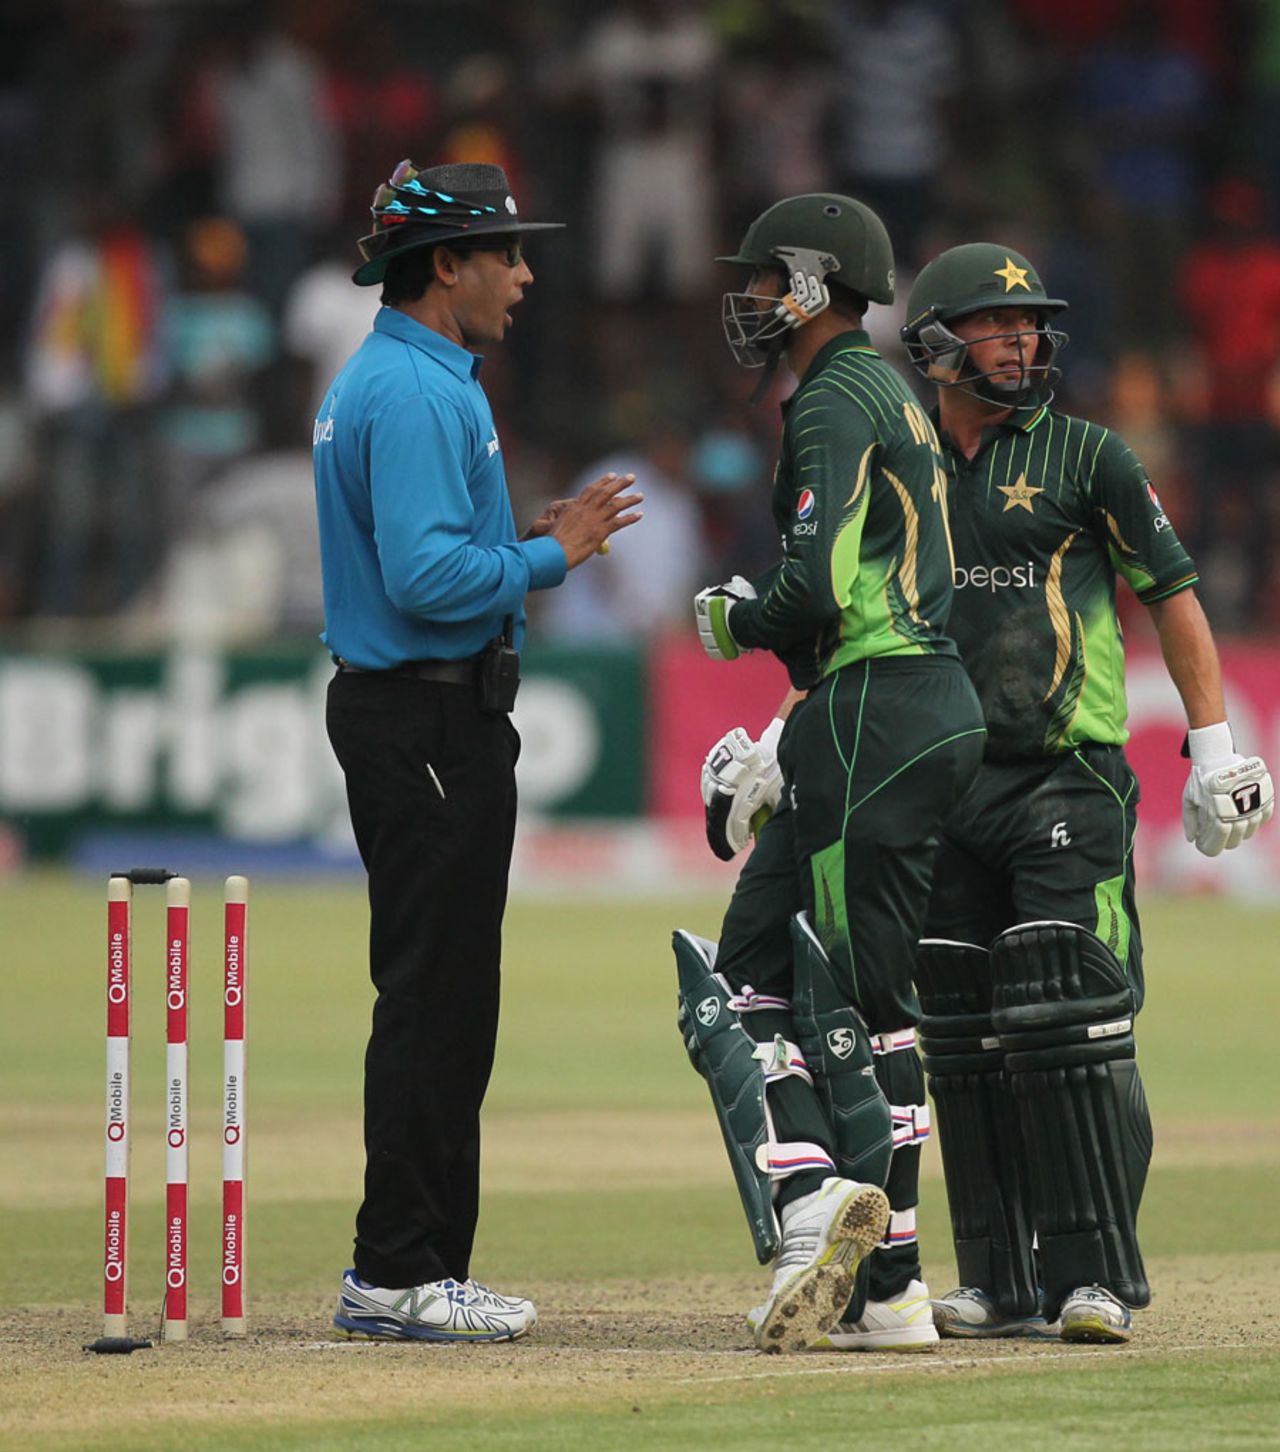 Shoaib Malik has a chat with the umpire after bad light ended the game, Zimbabwe v Pakistan, 2nd ODI, Harare, October 3, 2015